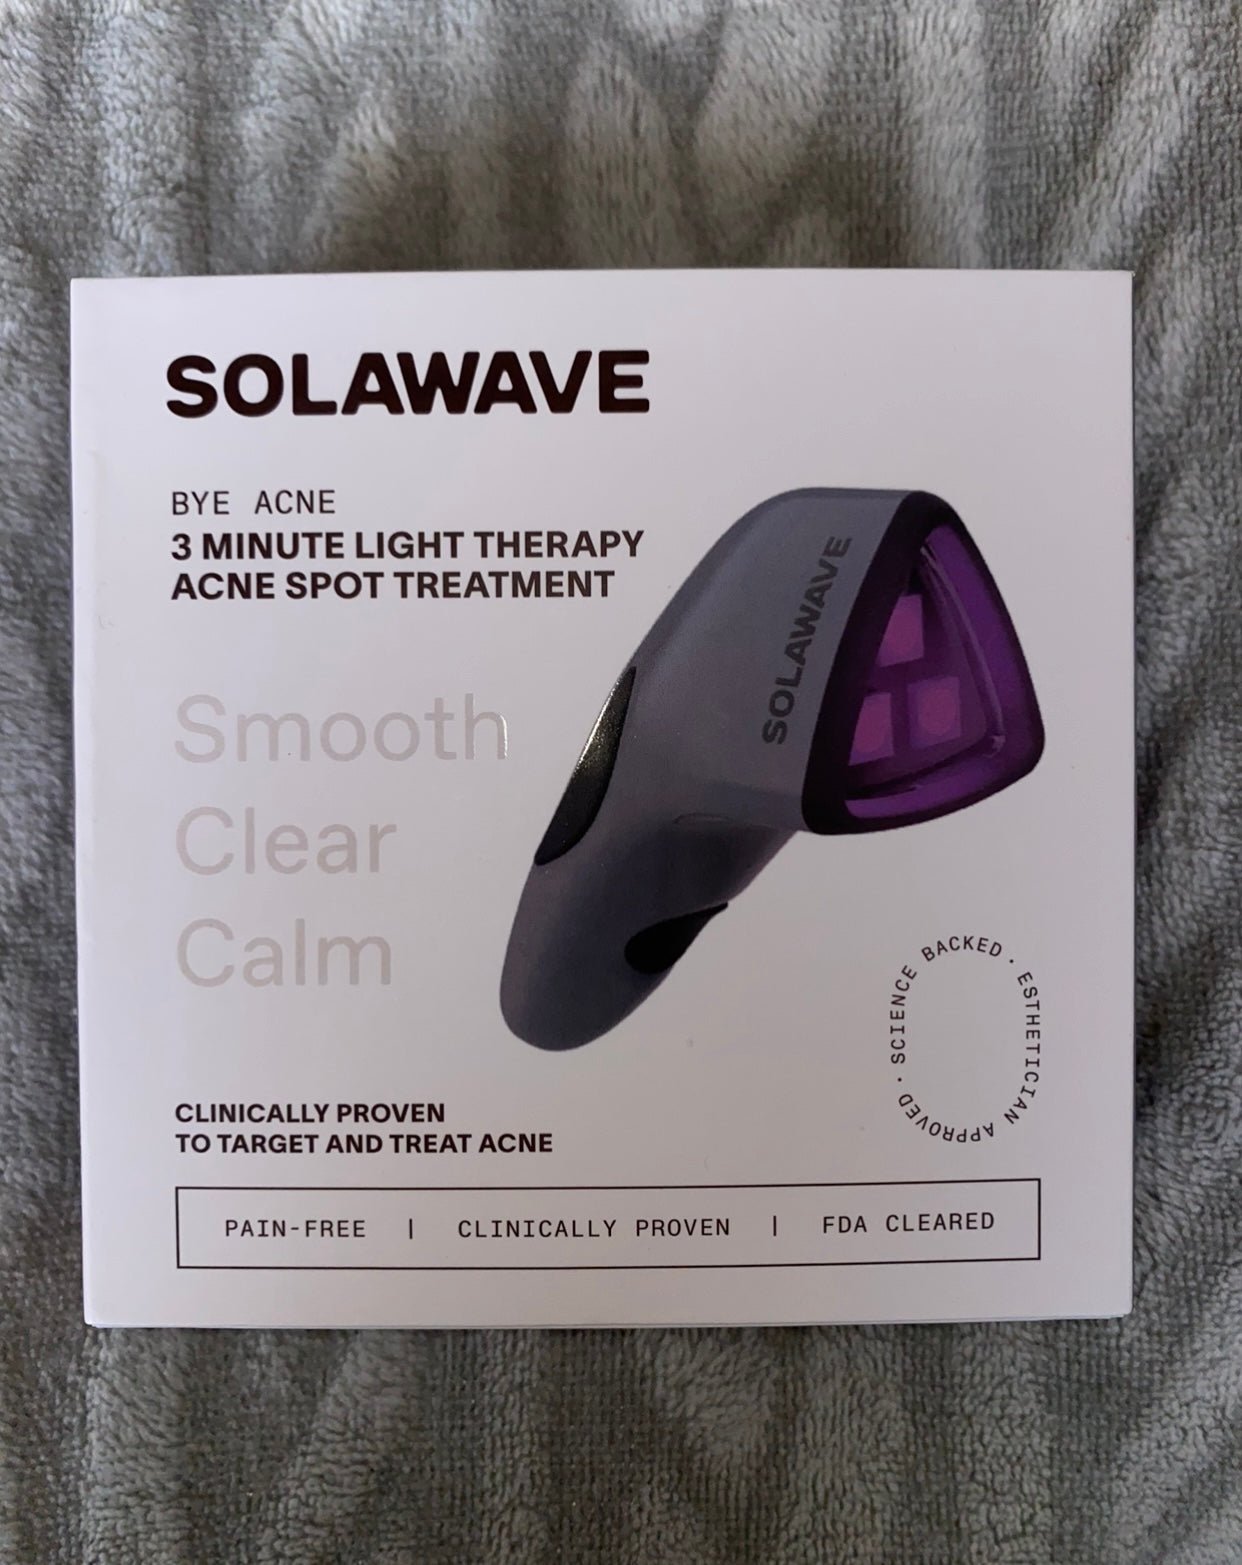 Solawave Bye Acne Light Therapy